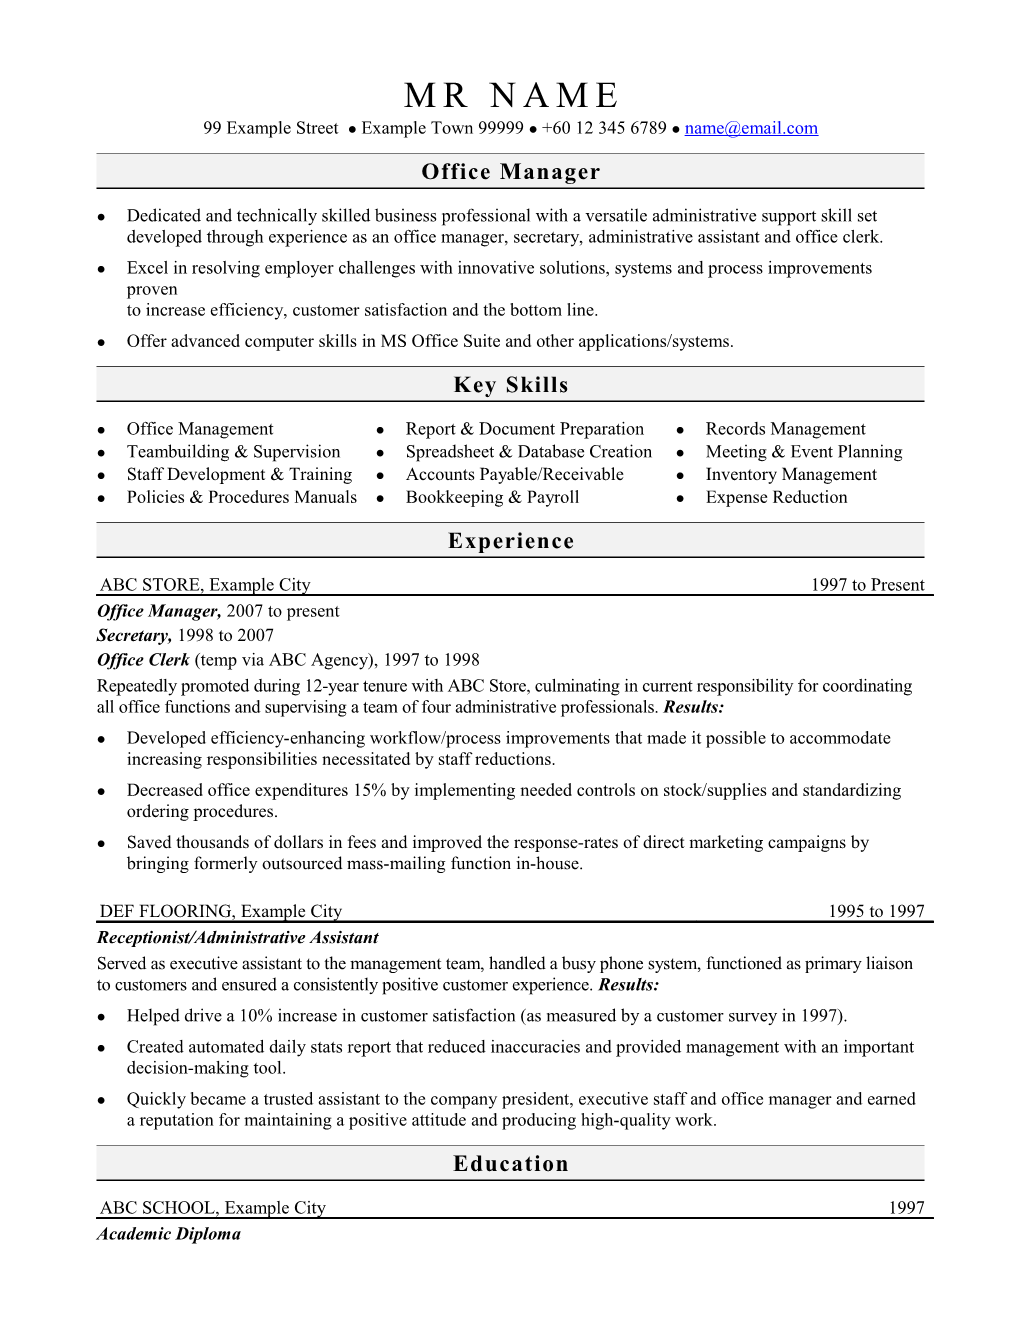 Sample Resume For An Office Manager